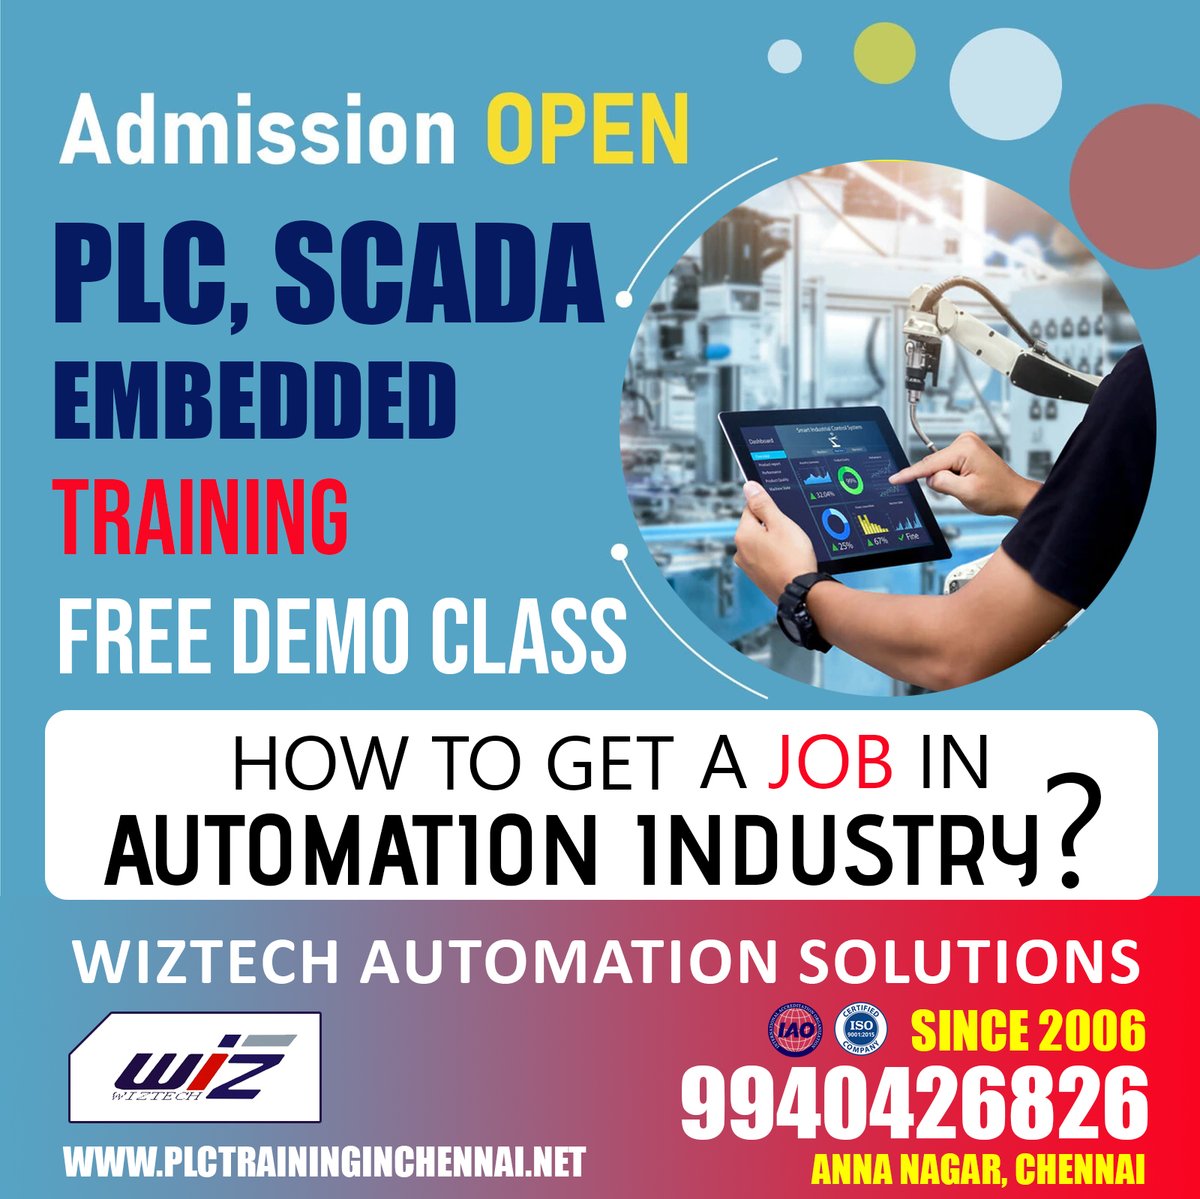 BEST PLC TRAINING CENTER IN CHENNAI:

#ARM #PIC .. #STM32 #RASPBERRYPI #ARDUINO
#EMBEDDEDC #8051 #ARM #ARDUINO #RASPBERRYPI #AVR #PIC #STM32 #EMBEDDEDSYSTEM #MICROCONTROLLERS #PROJECTCENTER #BESTPROJECT #LOWCOST #TRAINING #REALTIMEPROJECTS #ADVANCEDPROJECTS #PLC